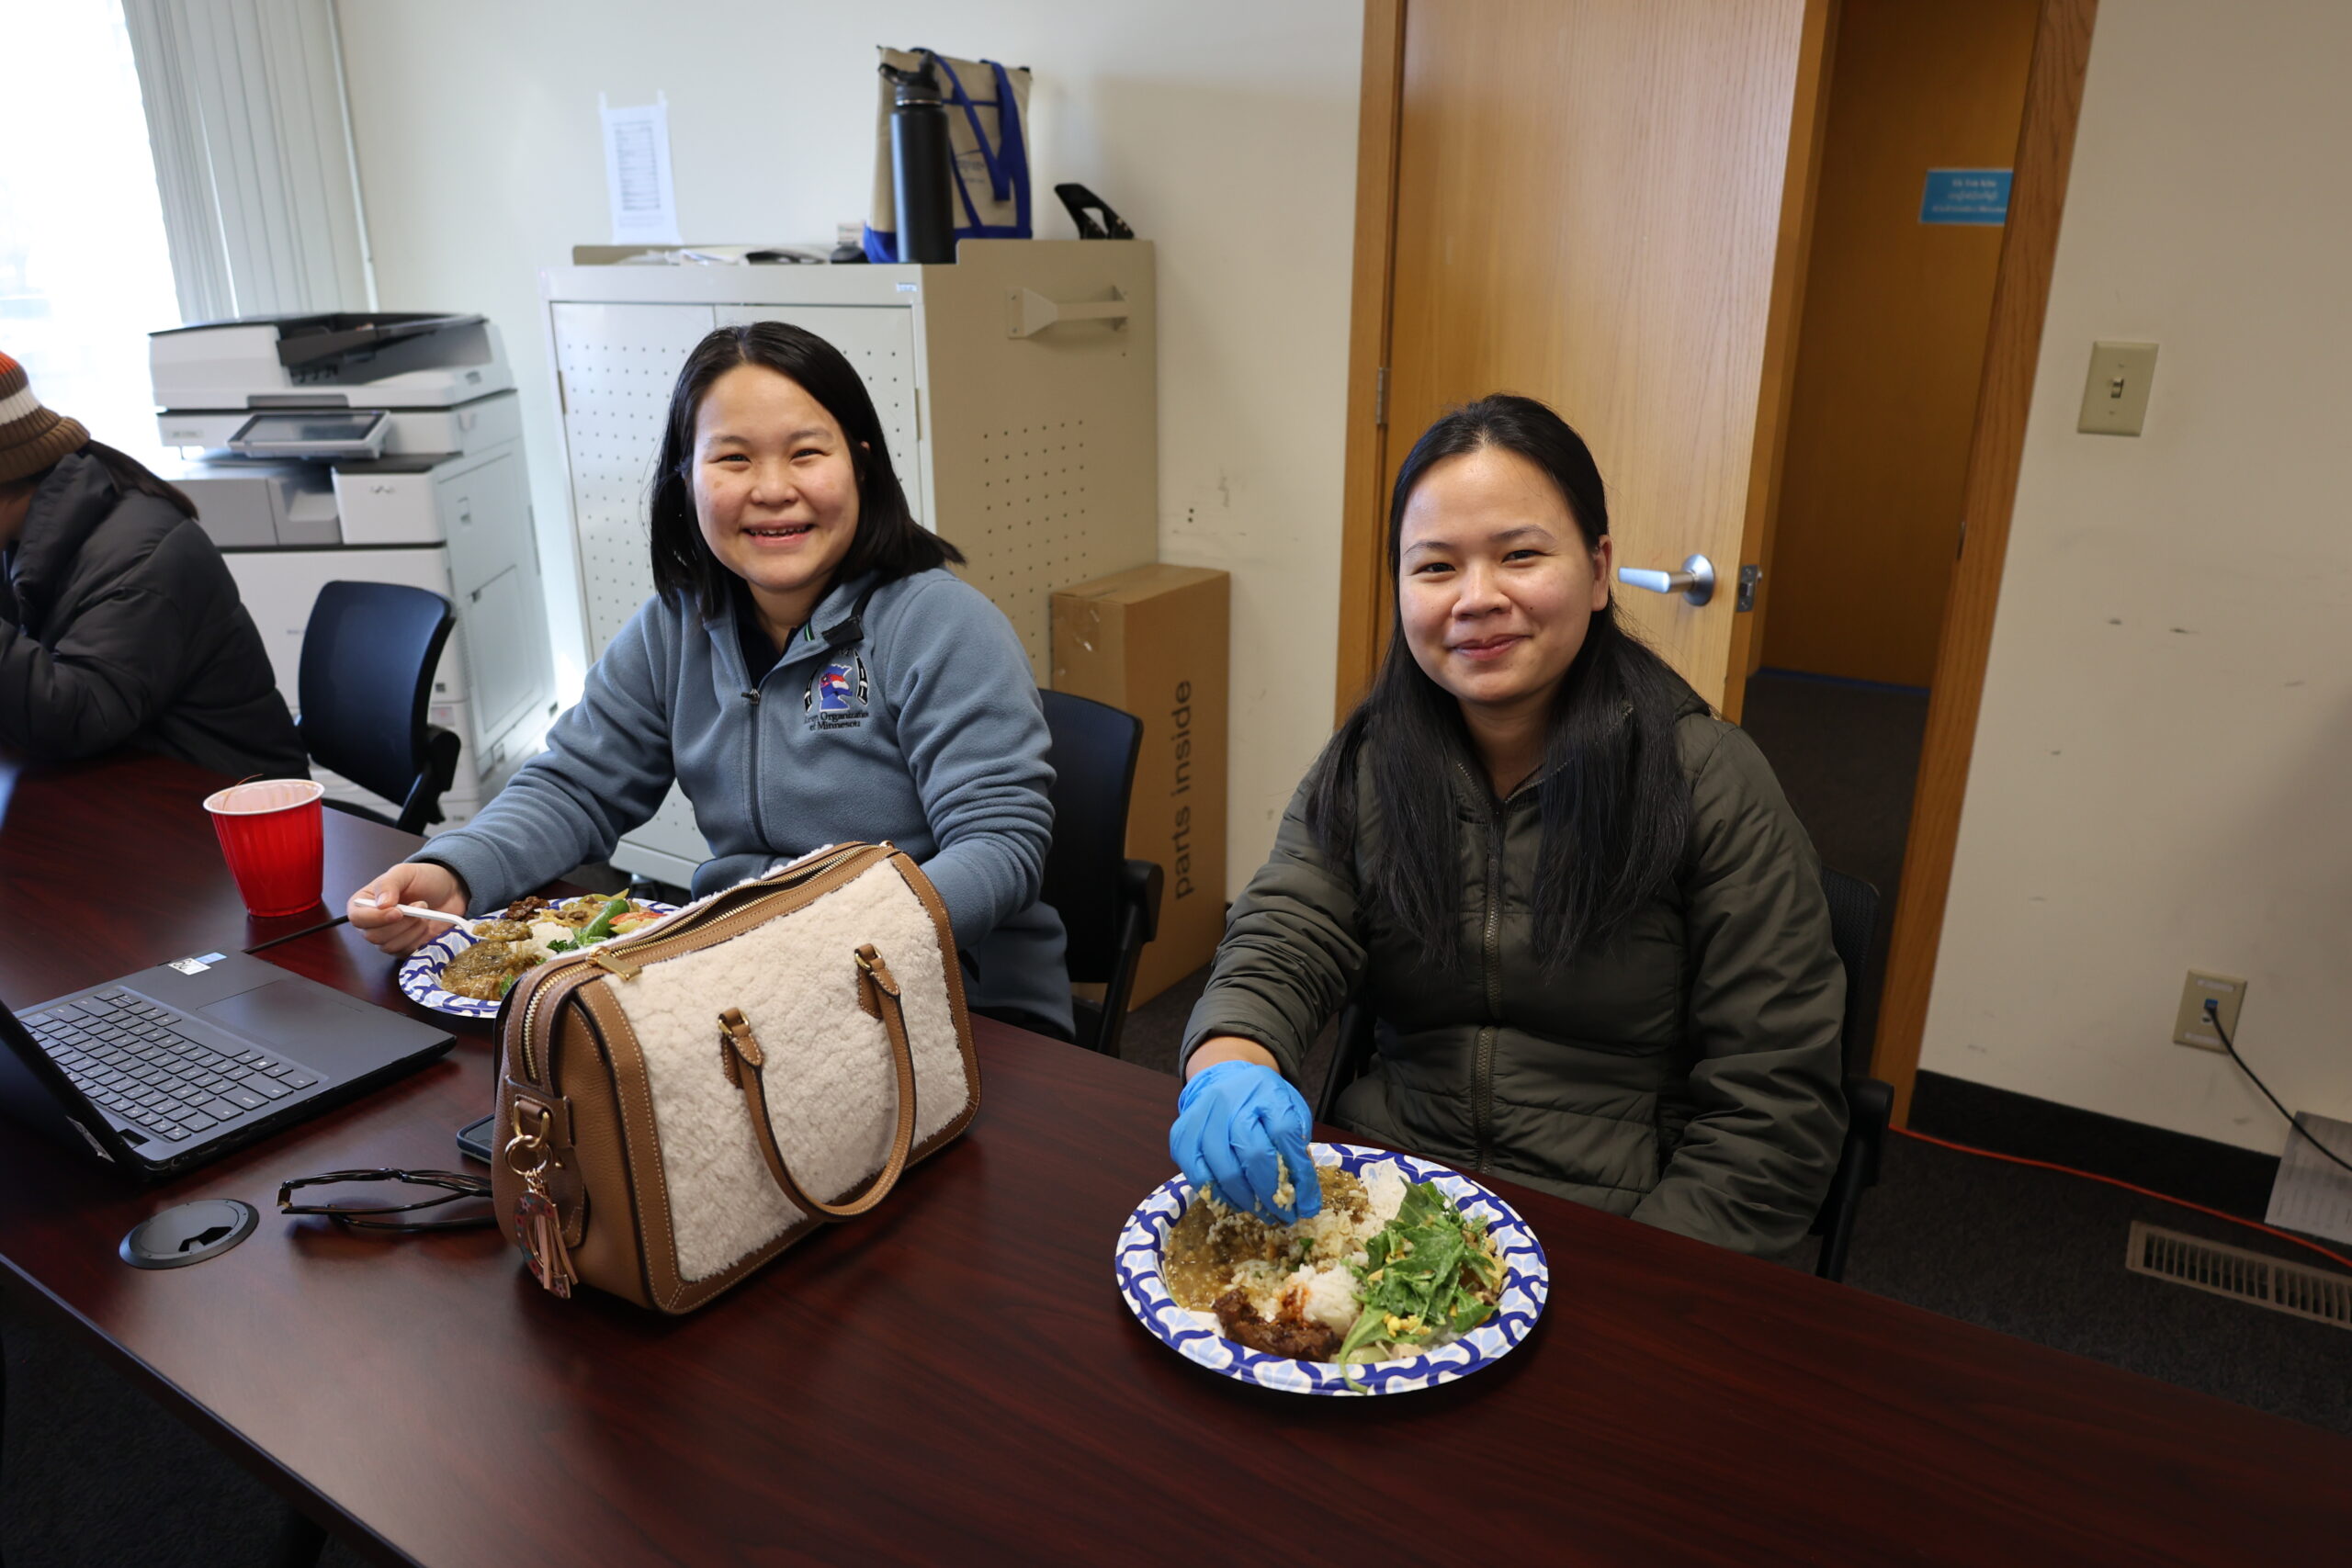 Two of our staff enjoying food after leading a caregivers training.